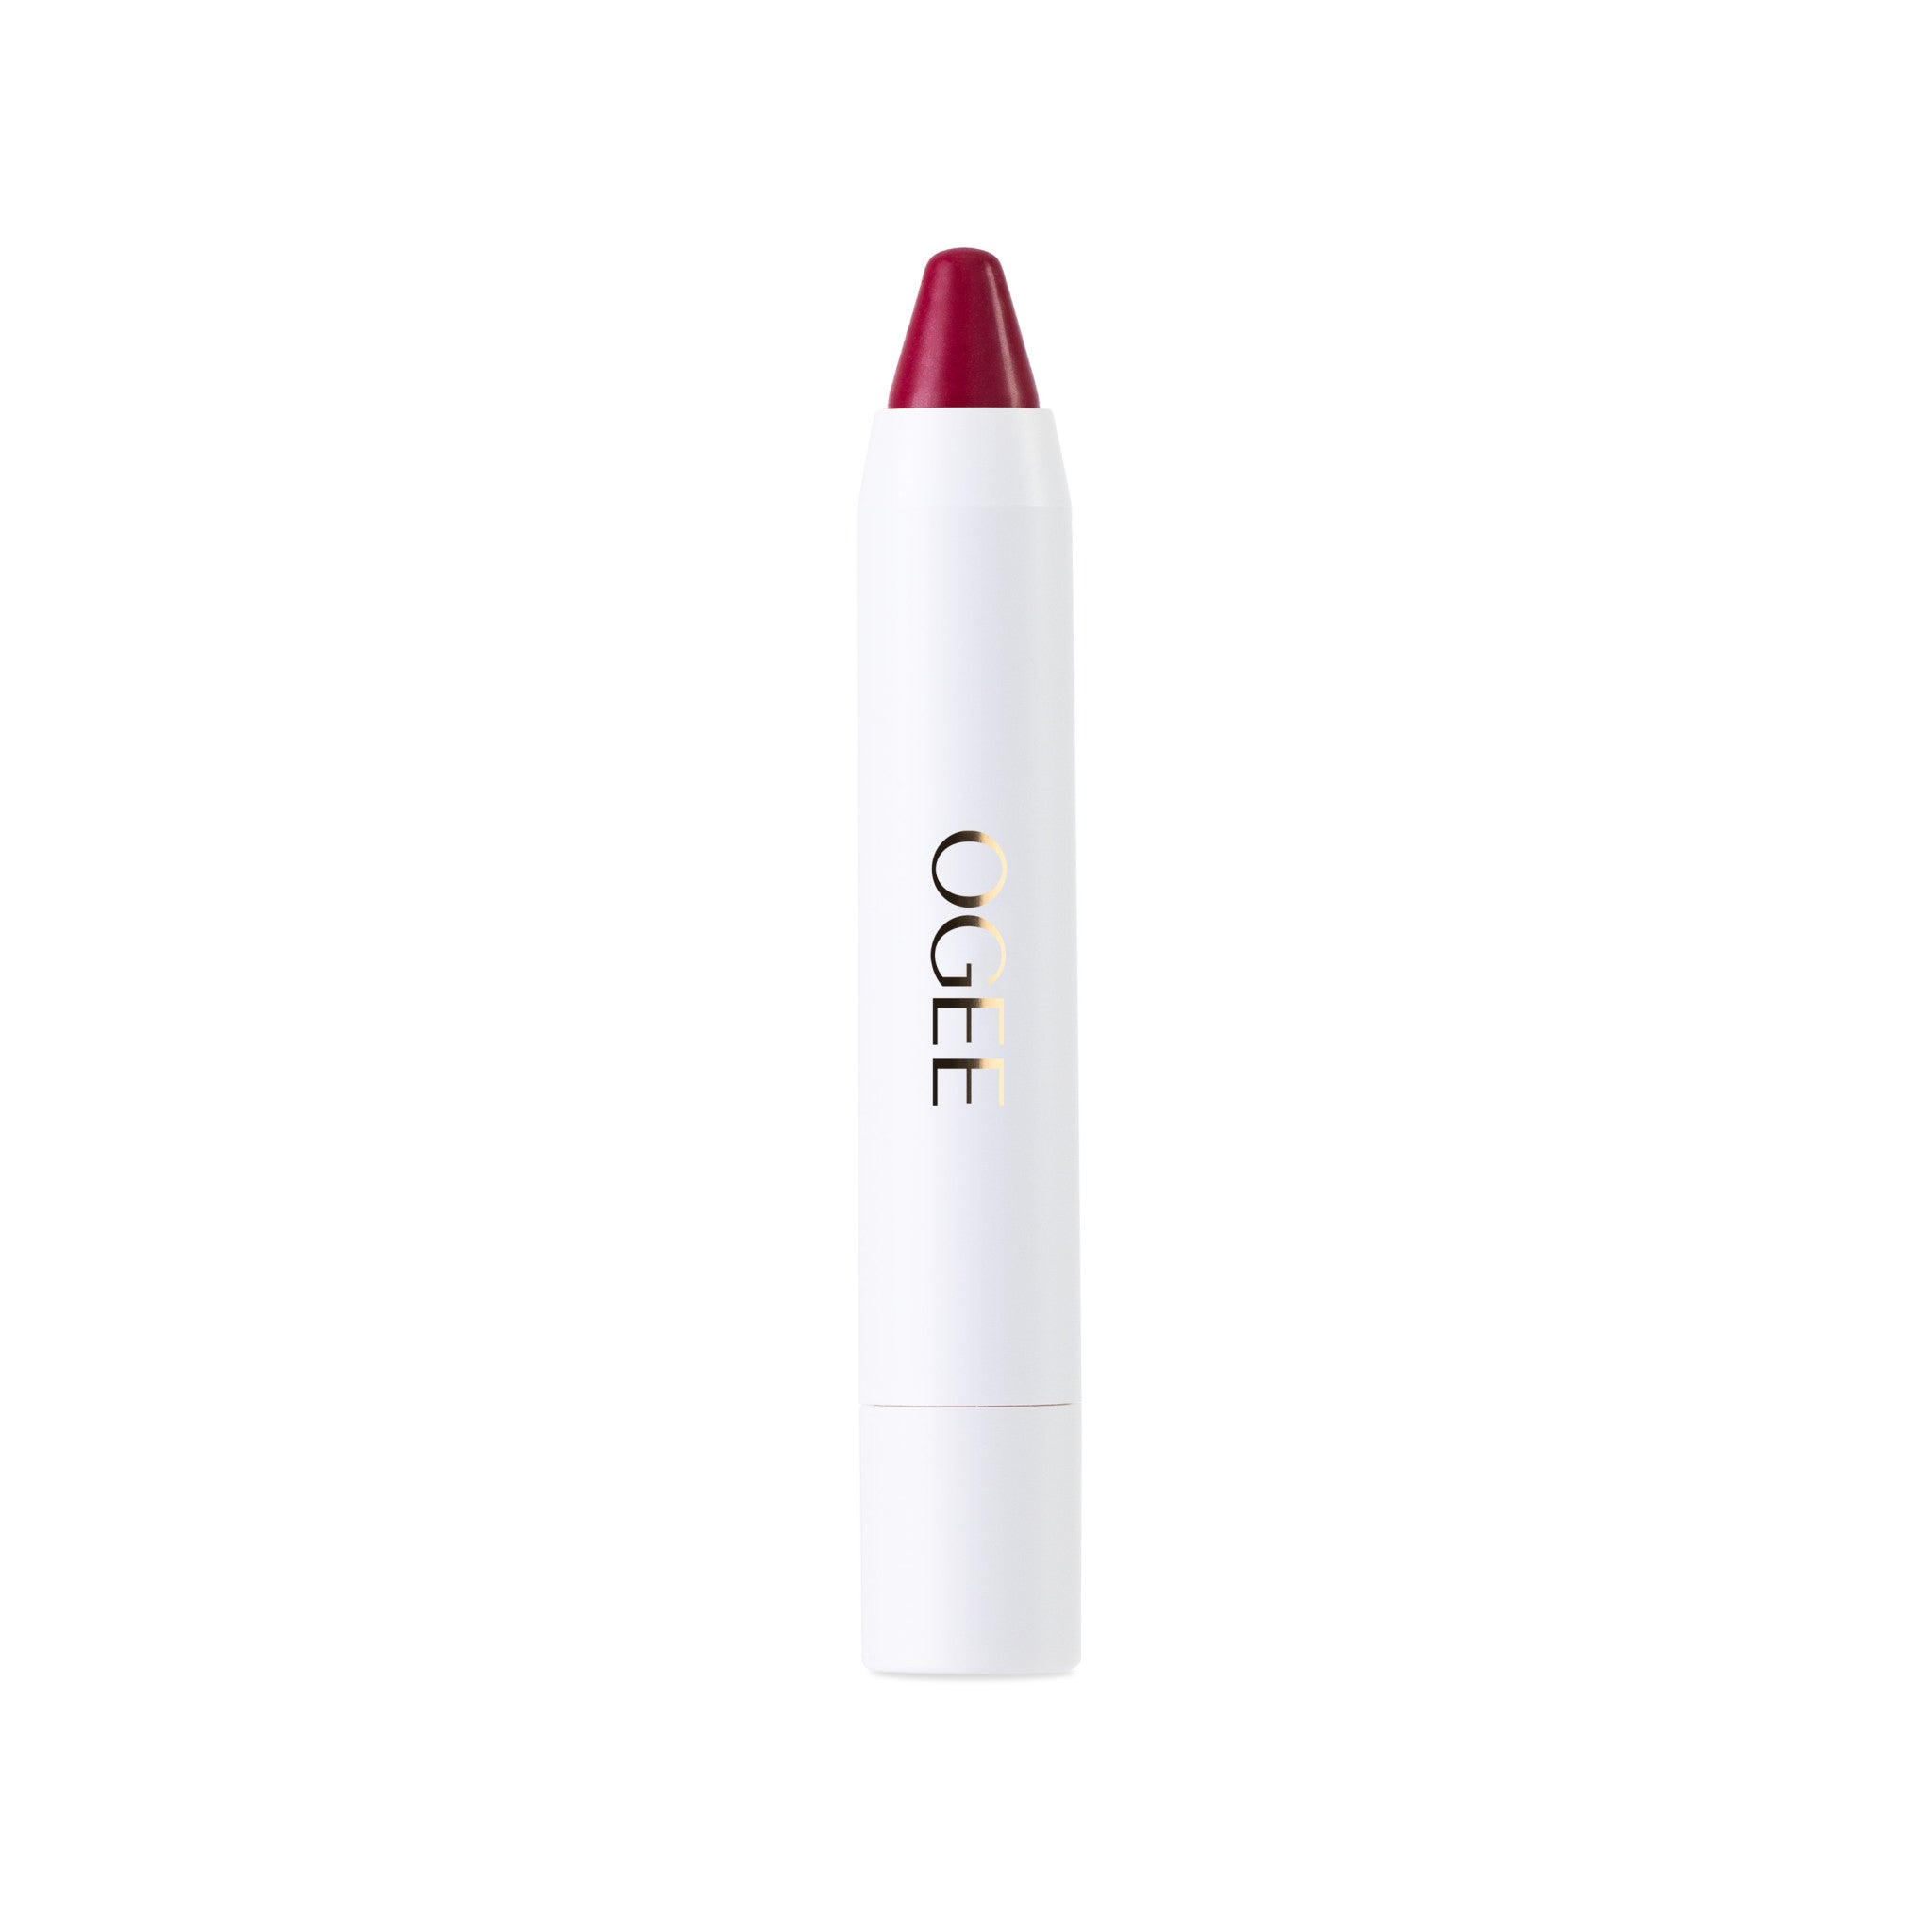 Ogee Tinted Sculpted Lip Oil Color/Shade variant: Azalea main image. This product is in the color pink